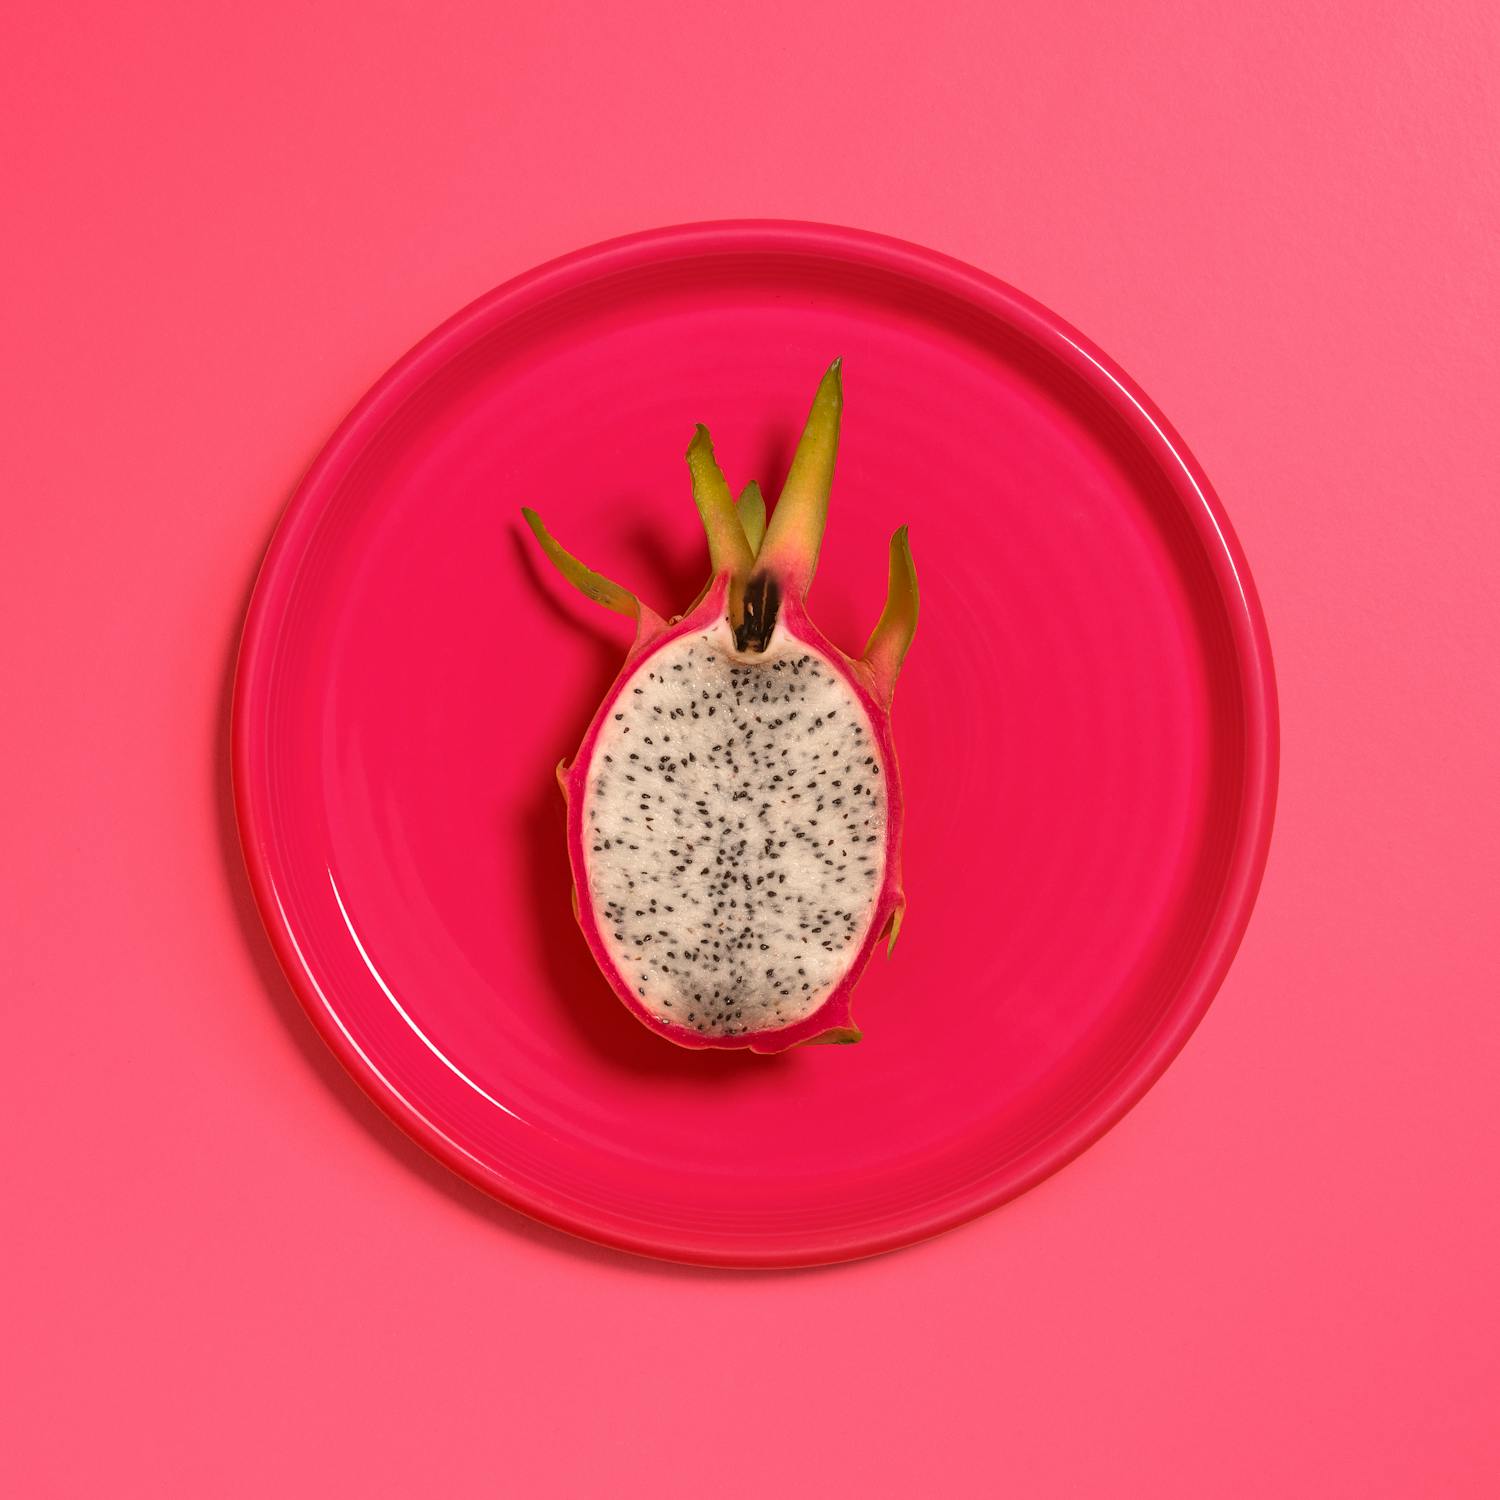 dragon fruit cut in half on bright pink plate w/ pink backdrop